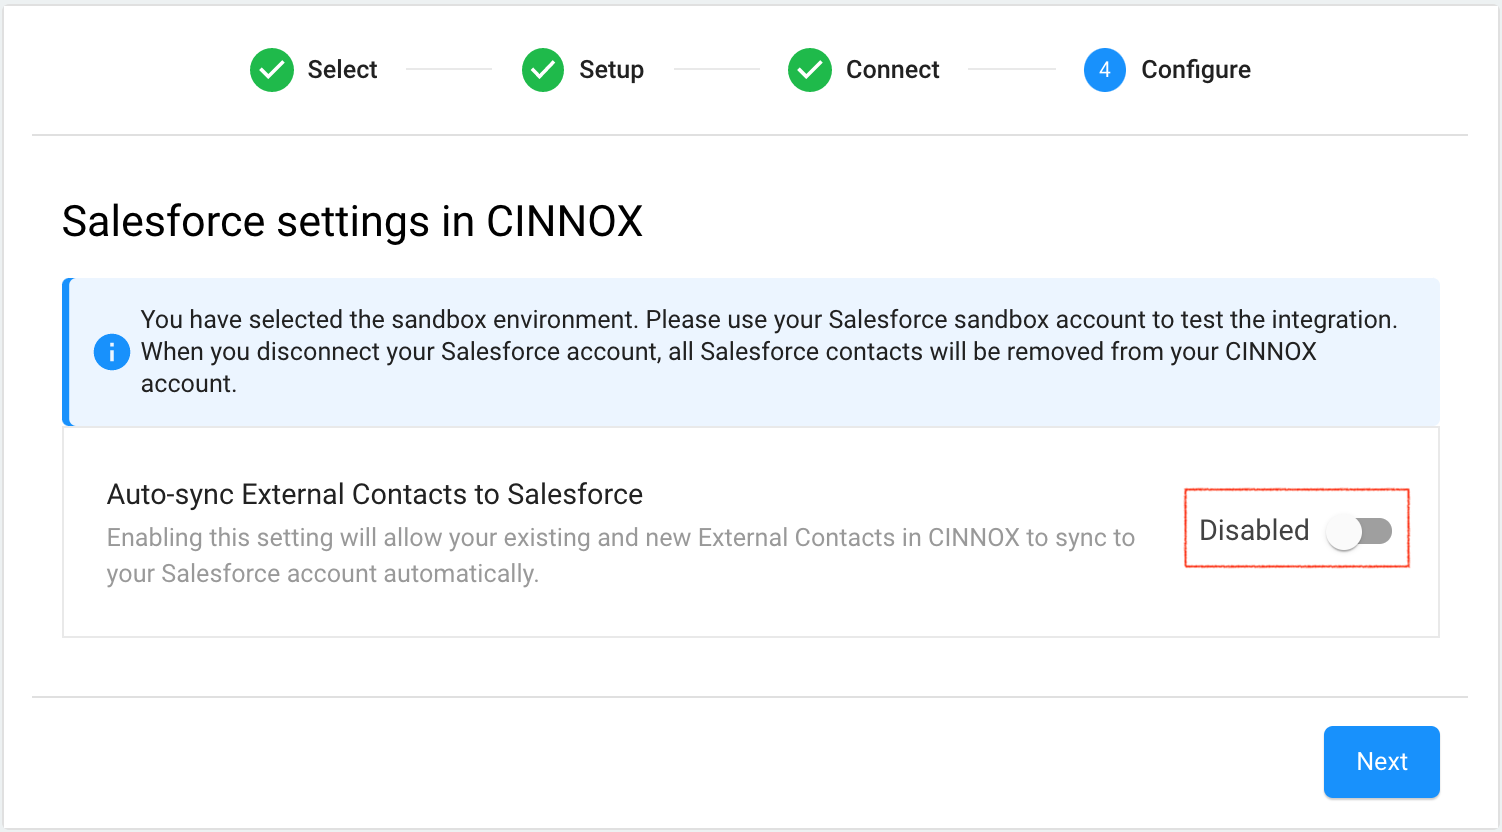 Auto-sync External Contacts to Salesforce Settings